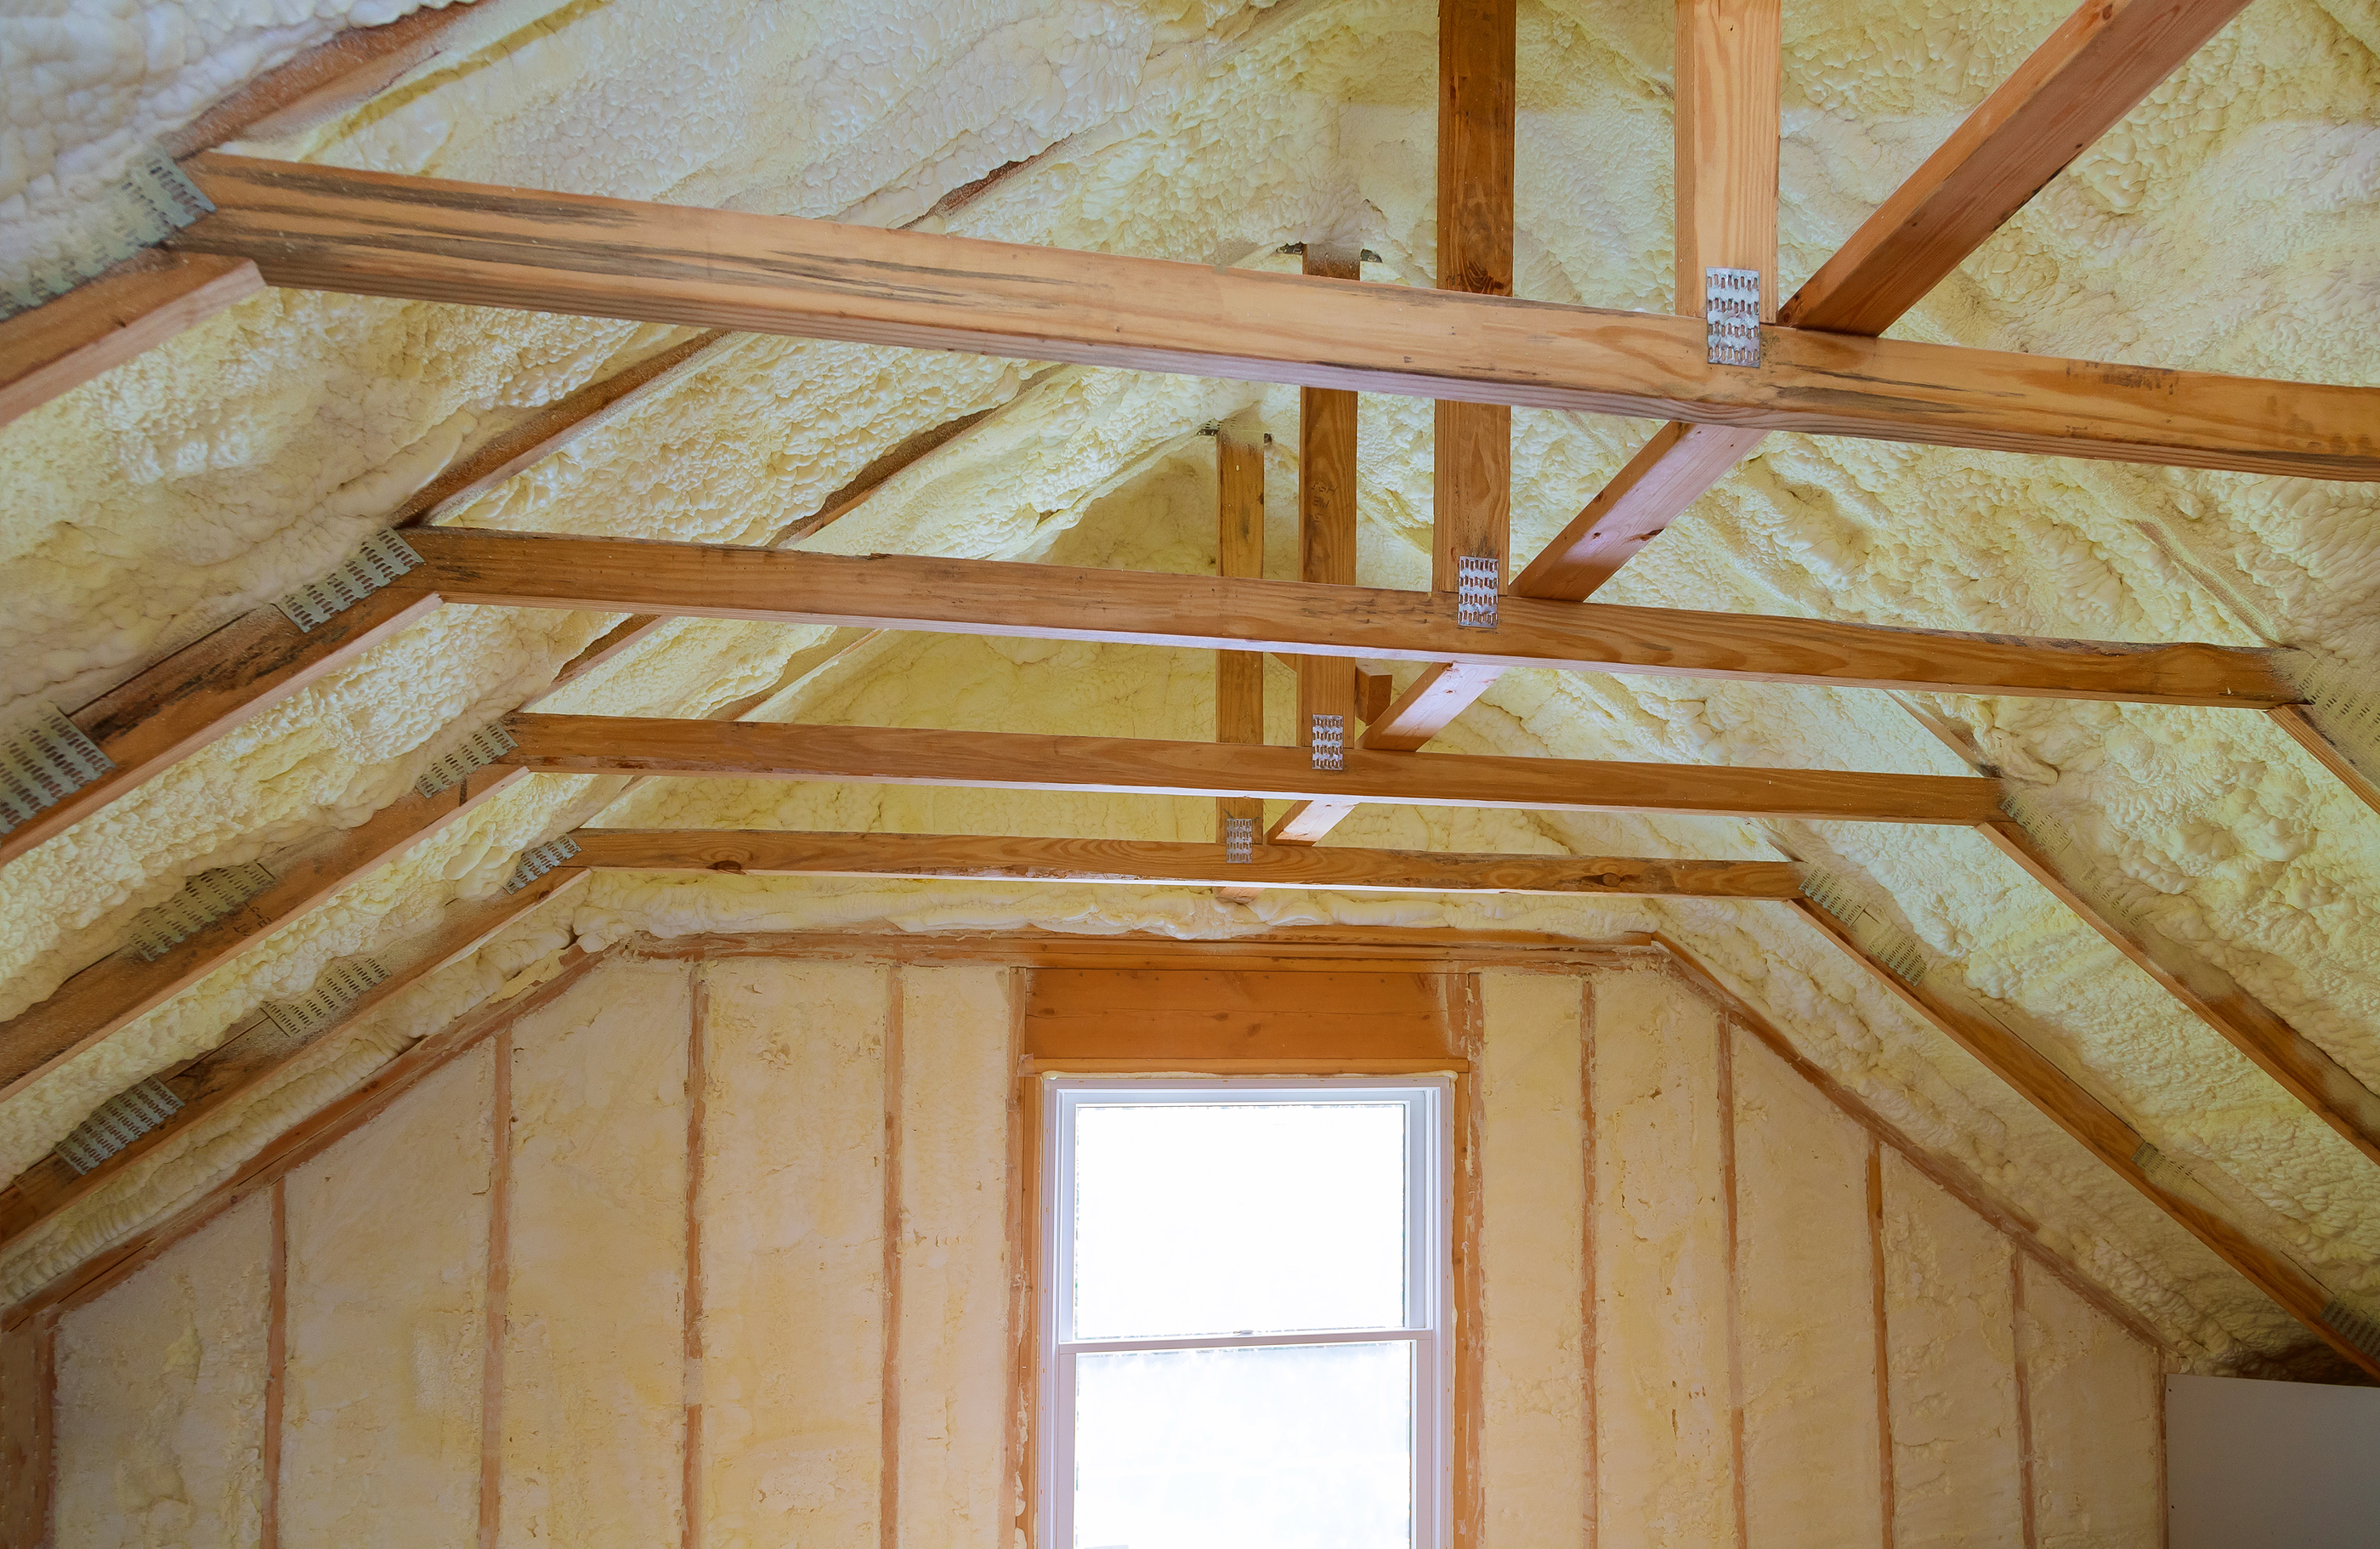 Insulation R-Value And Why It Matters